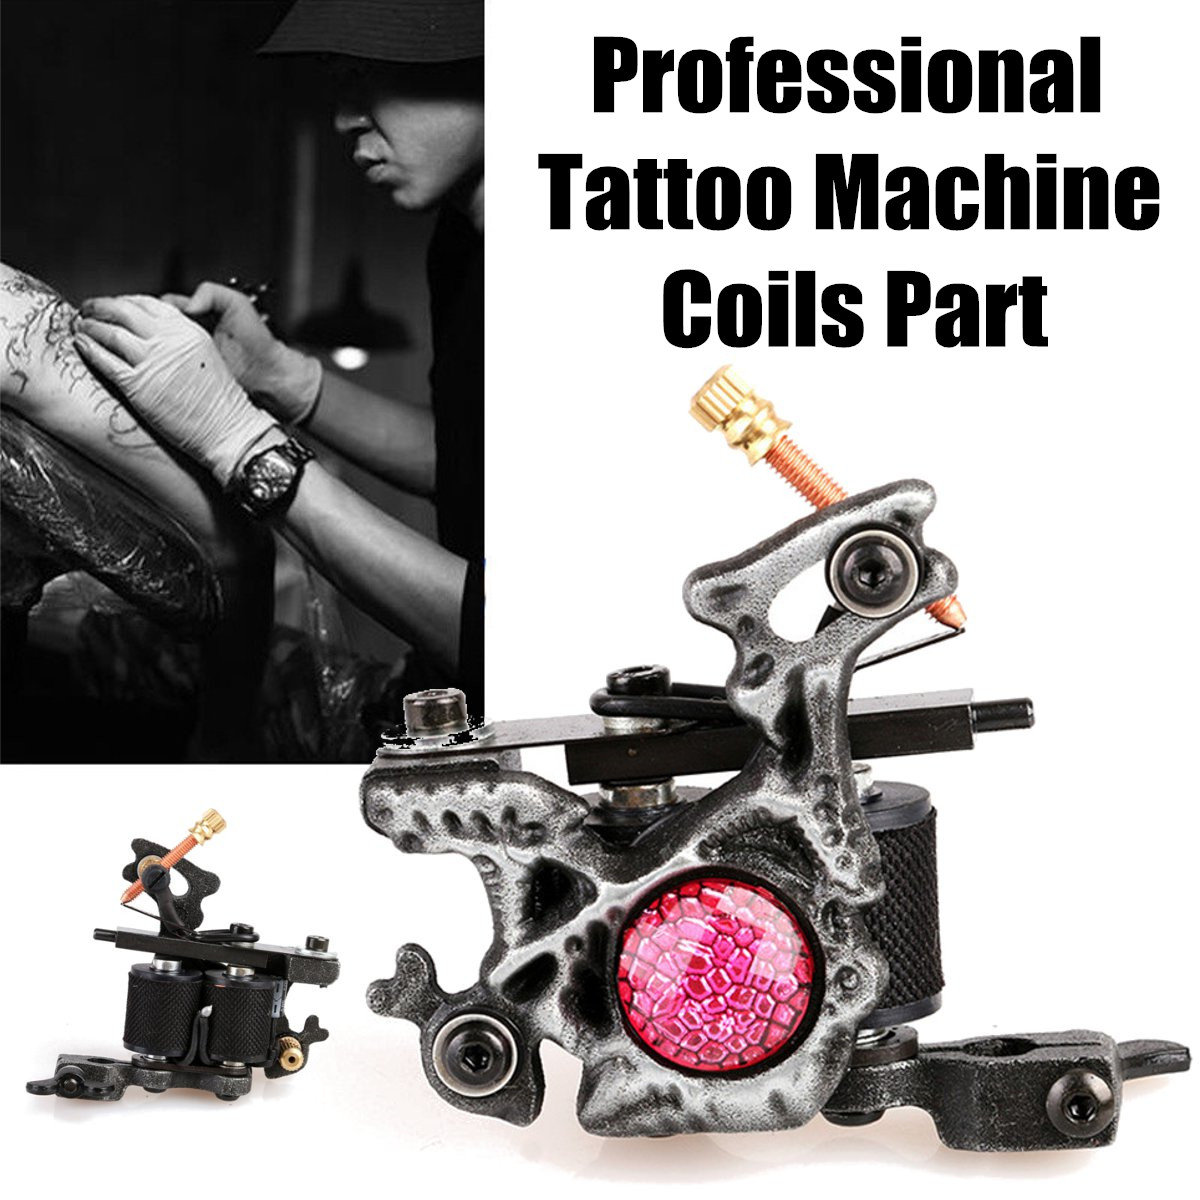 

Red Blood Cell Tattoo Machine